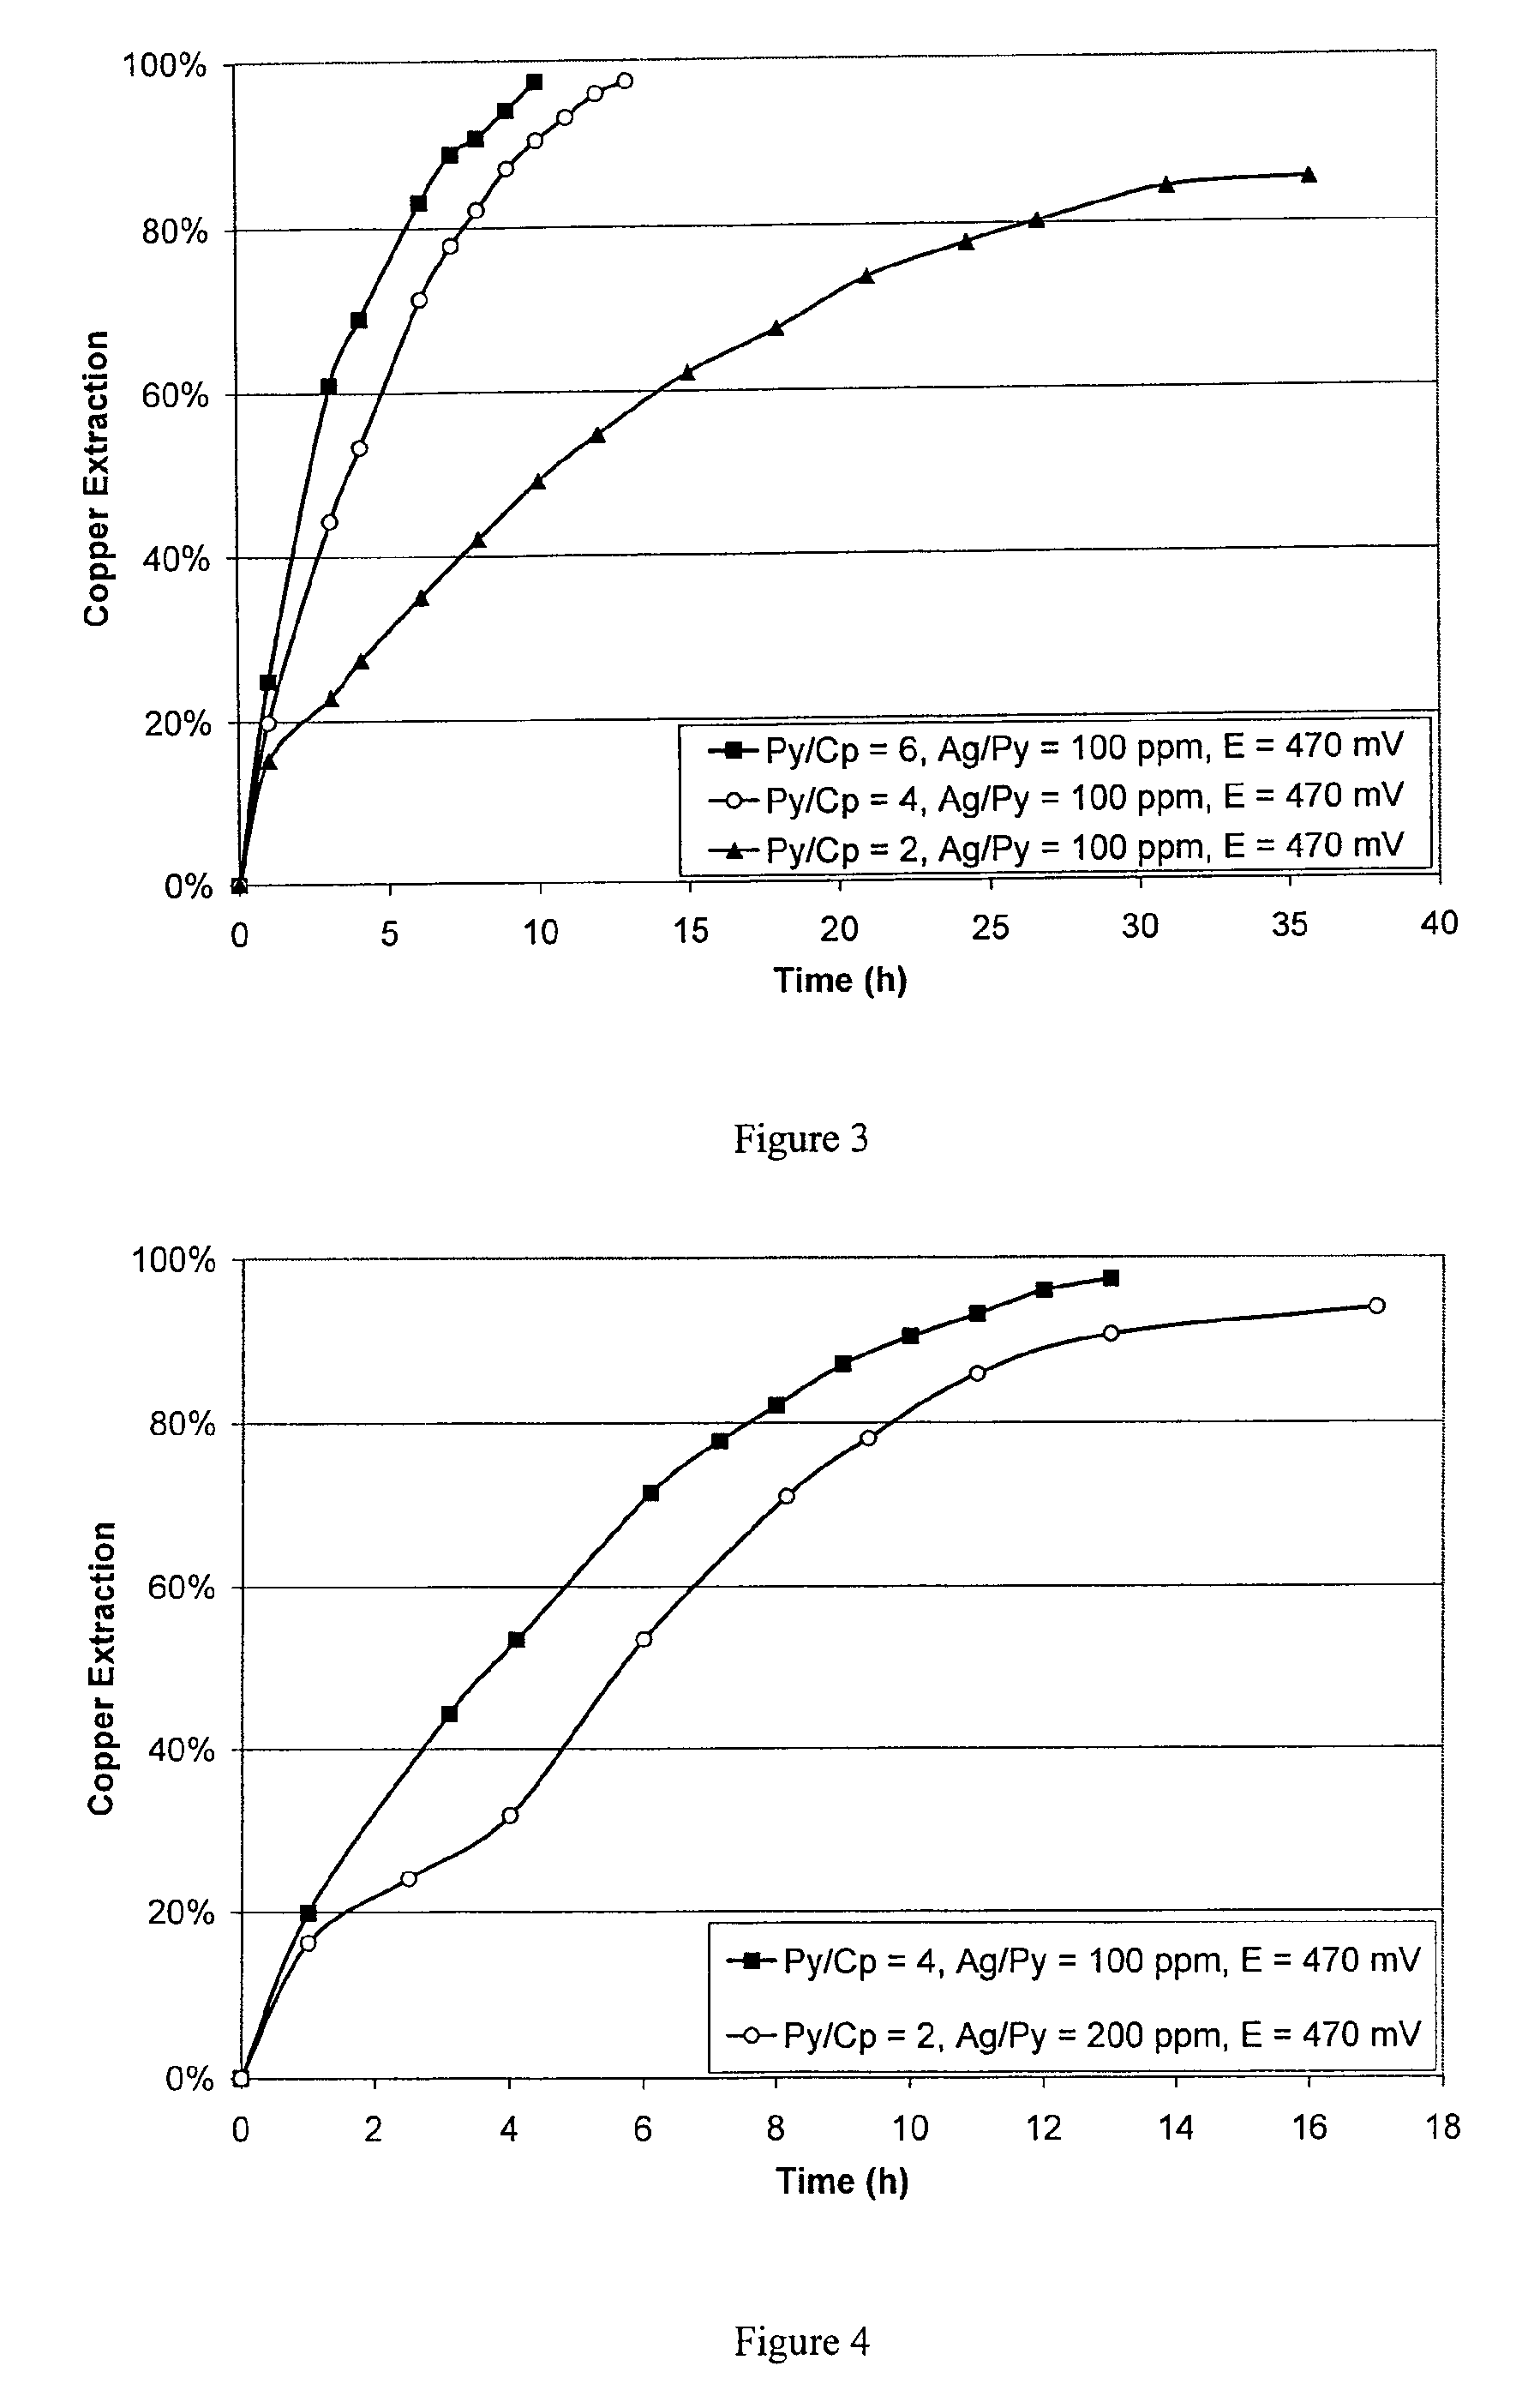 Leaching process for copper concentrates containing chalcopyrite